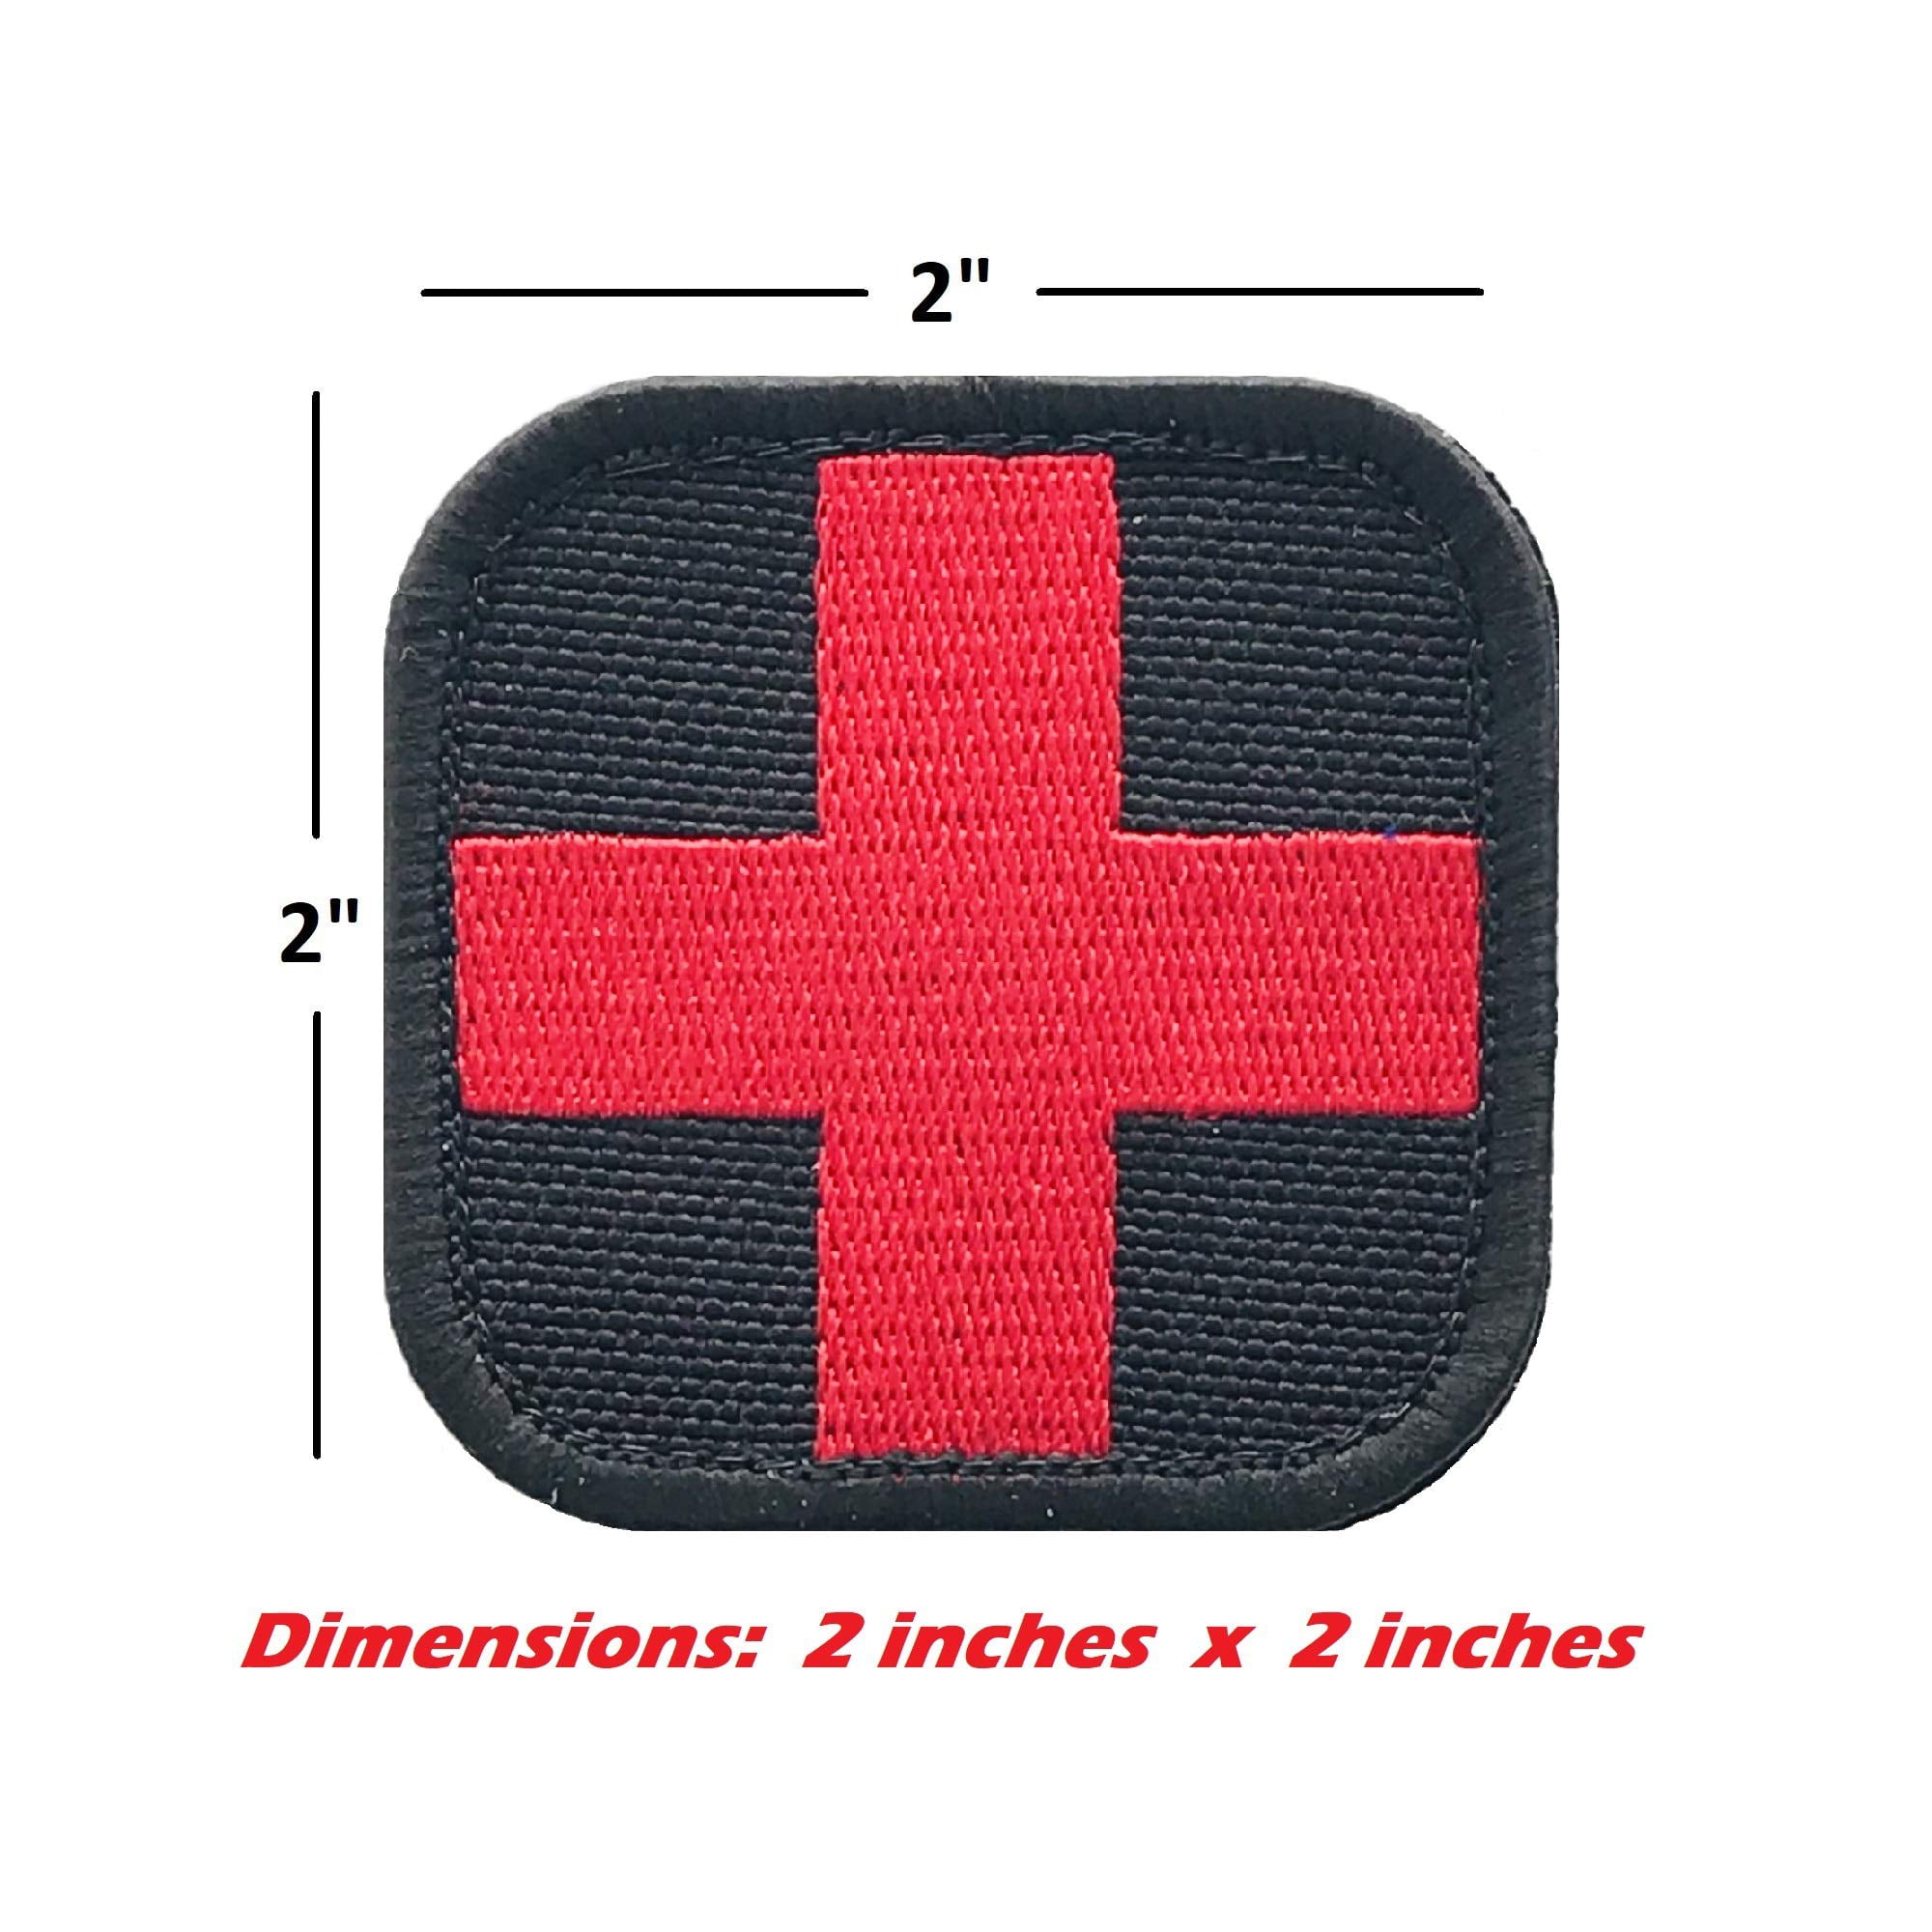 MEDIC PATCH FIRST AID 1ST AID MEDICAL TRAUMA VELCRO® ID PATCH MULTICAM LOW VIS 